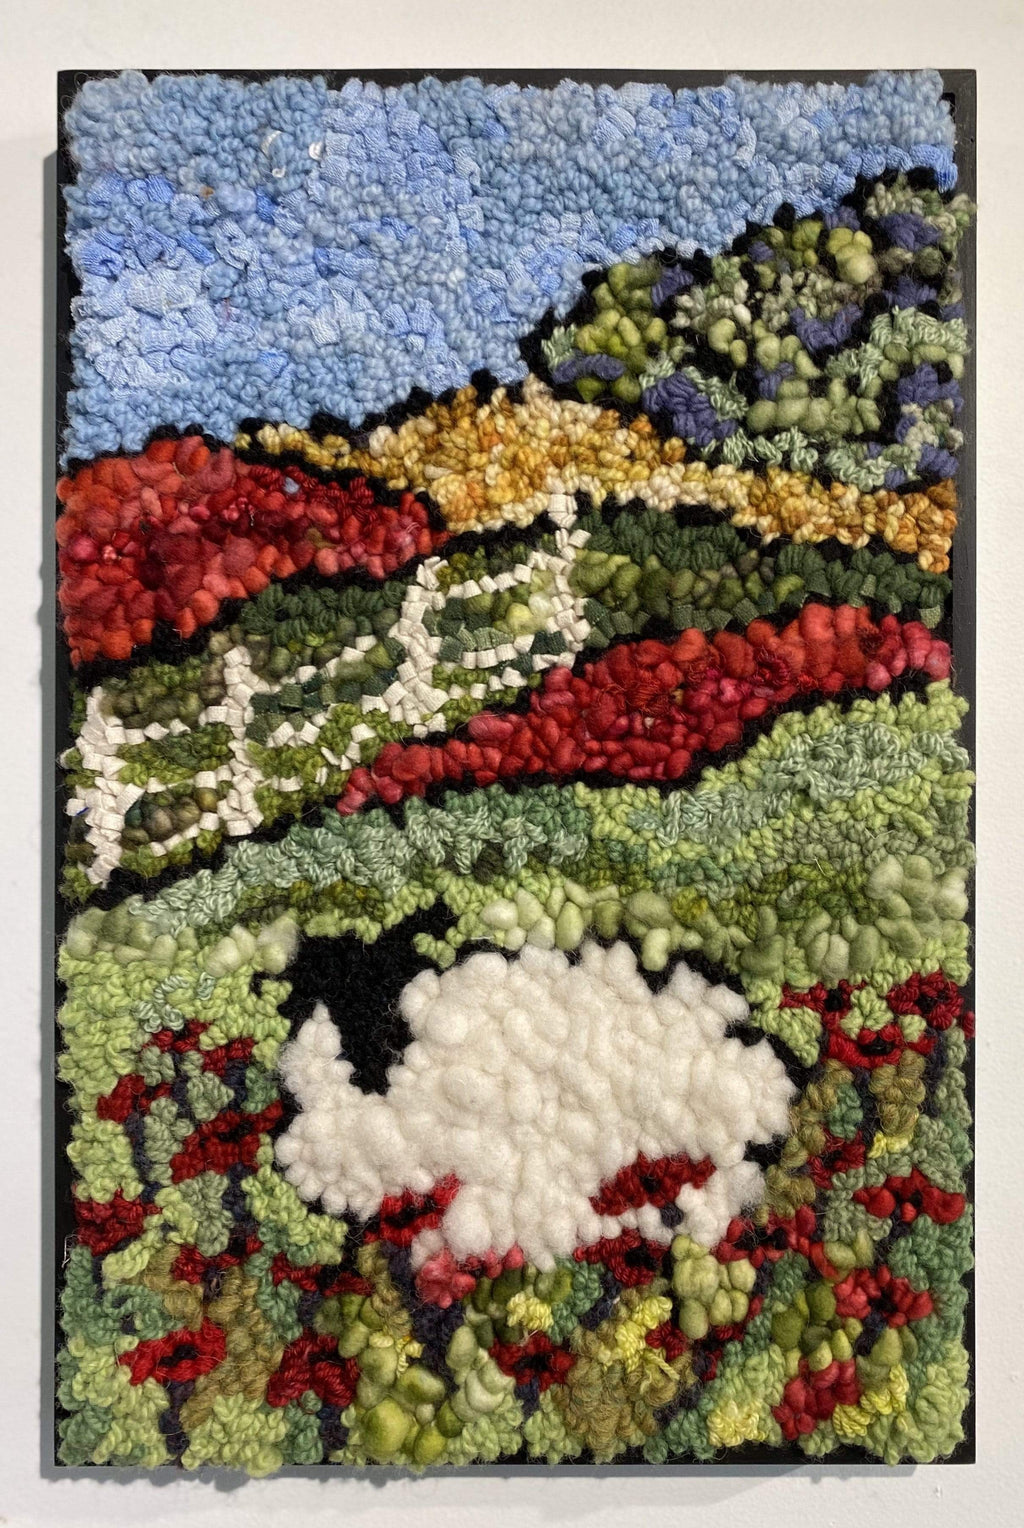 update alt-text with template Sheep in a Field of Poppies - Rug Hooking Kit 11" x 17"-Kits-Deanne Fitzpatrick Rug Hooking Studio-Rug Hooking Kit -Rug Hooking Pattern -Rug Hooking -Deanne Fitzpatrick Rug Hooking Studio -Is rug hooking the same as punch needle?